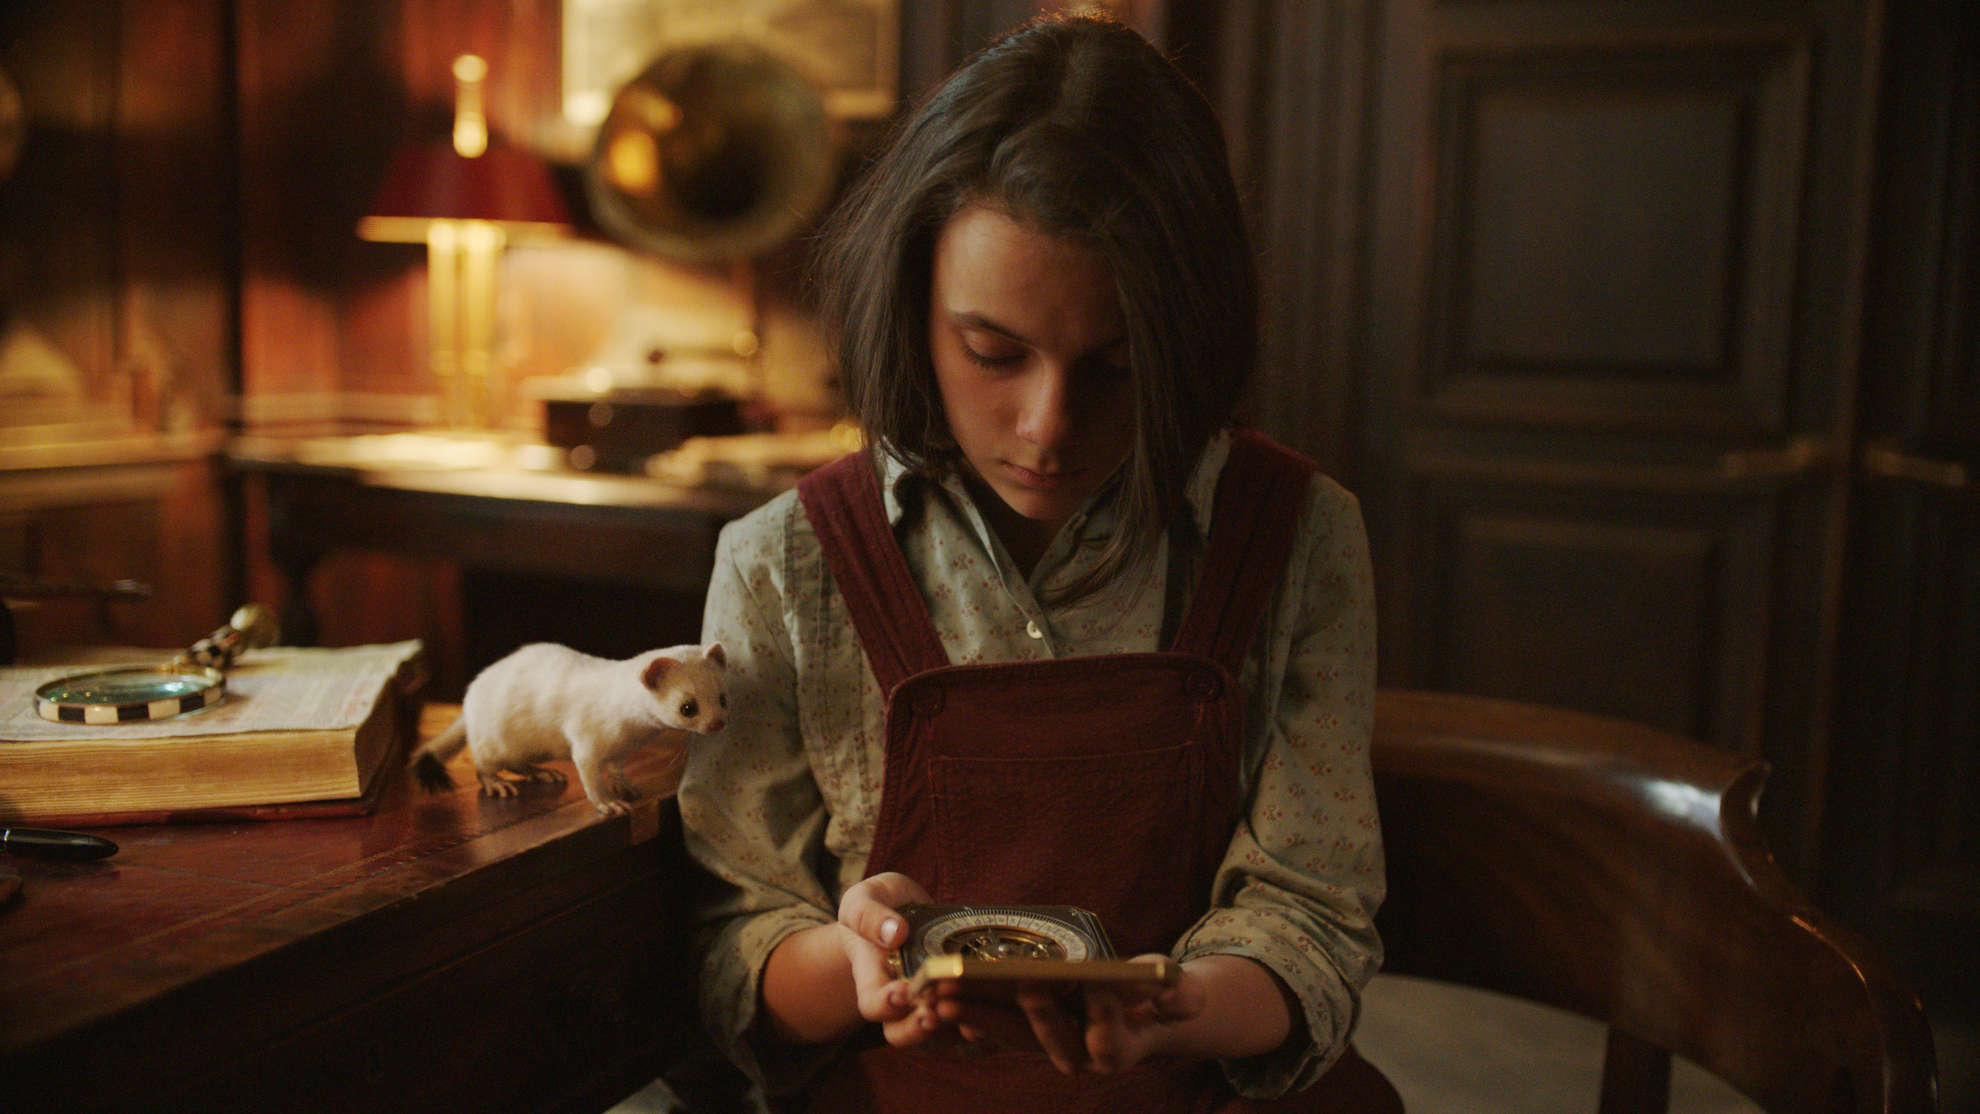 A young girl looks at a strange instrument with a white weasel on the table in this image from New Line Productions.